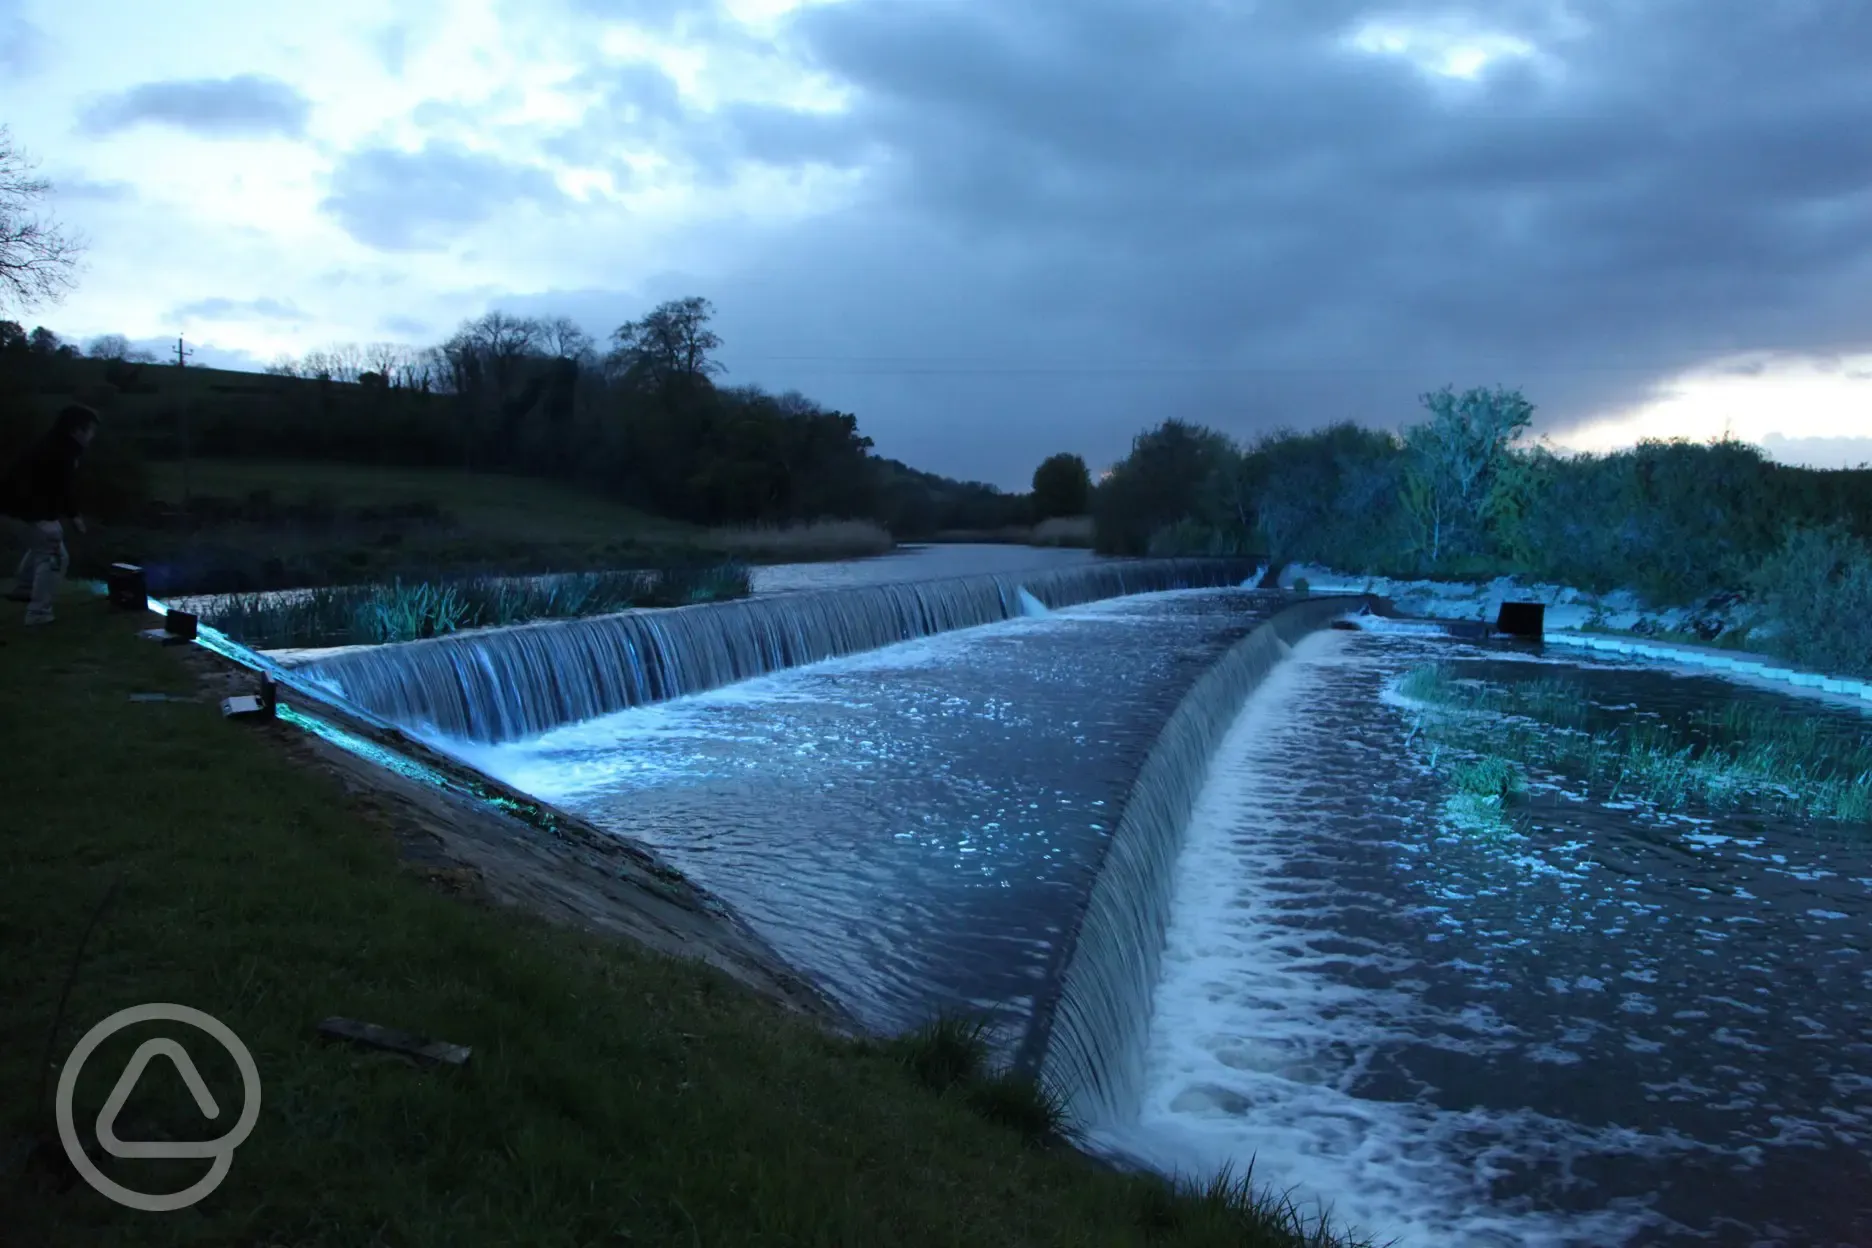 The Weir at night